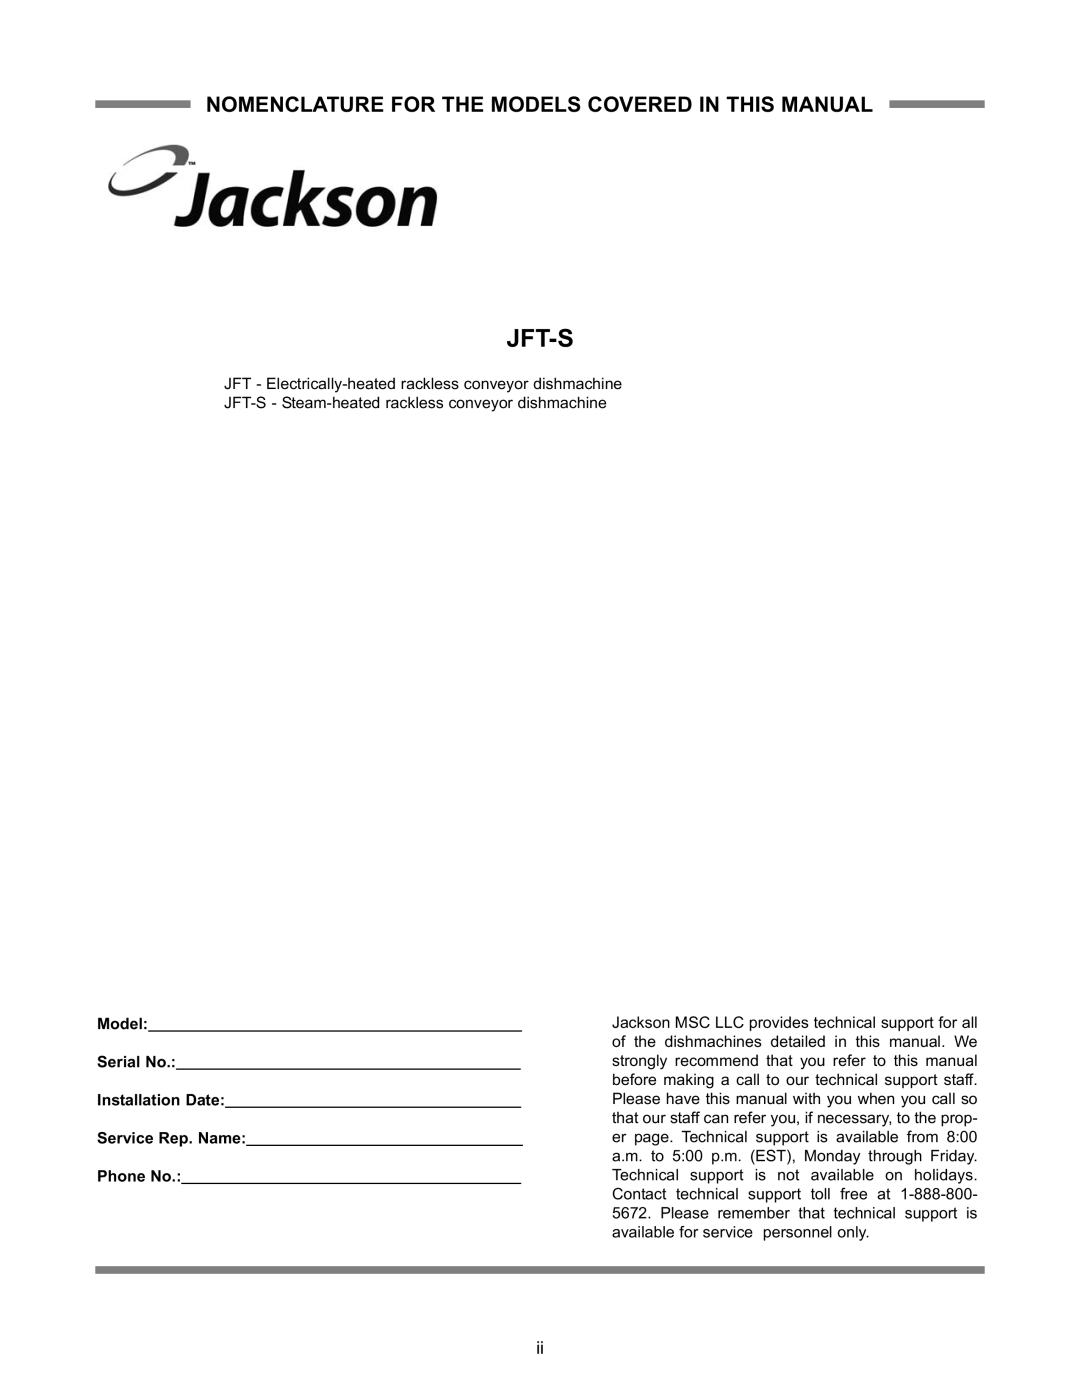 Jackson JFT-S technical manual Jft-S, Model Serial No Installation Date, Service Rep. Name Phone No 